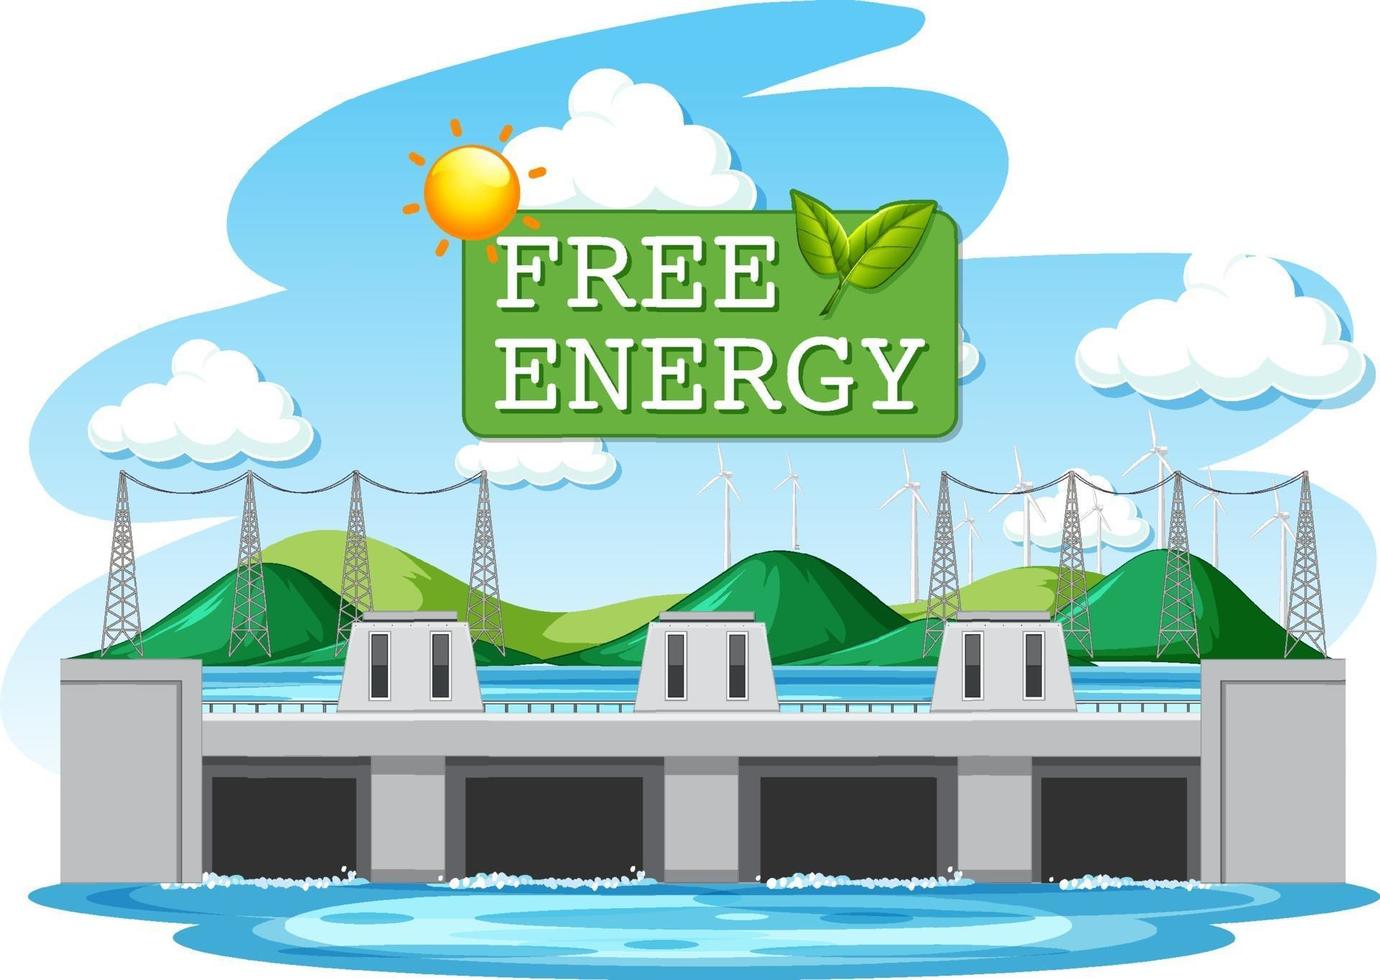 Hydro Power Plants generate electricity with free energy banner vector